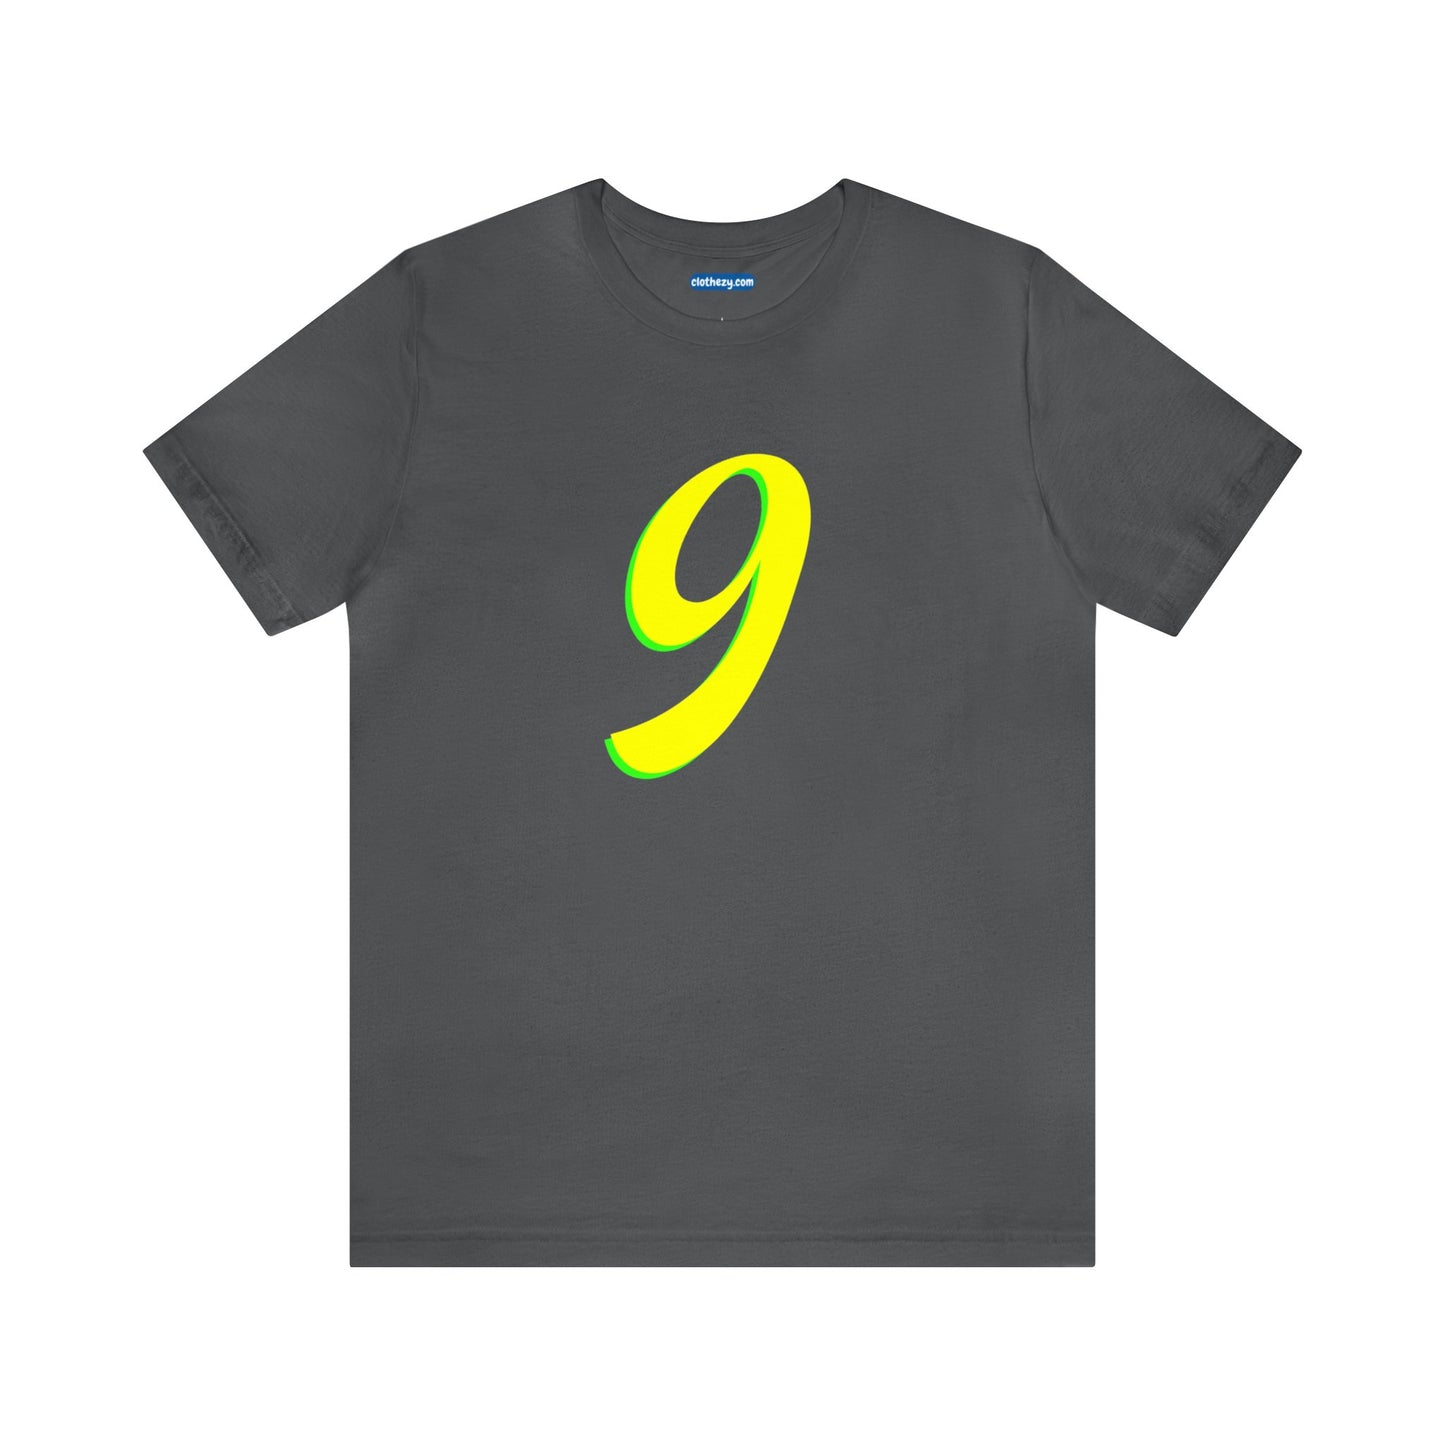 Number 9 Design - Soft Cotton Tee for birthdays and celebrations, Gift for friends and family, Multiple Options by clothezy.com in Black Size Small - Buy Now